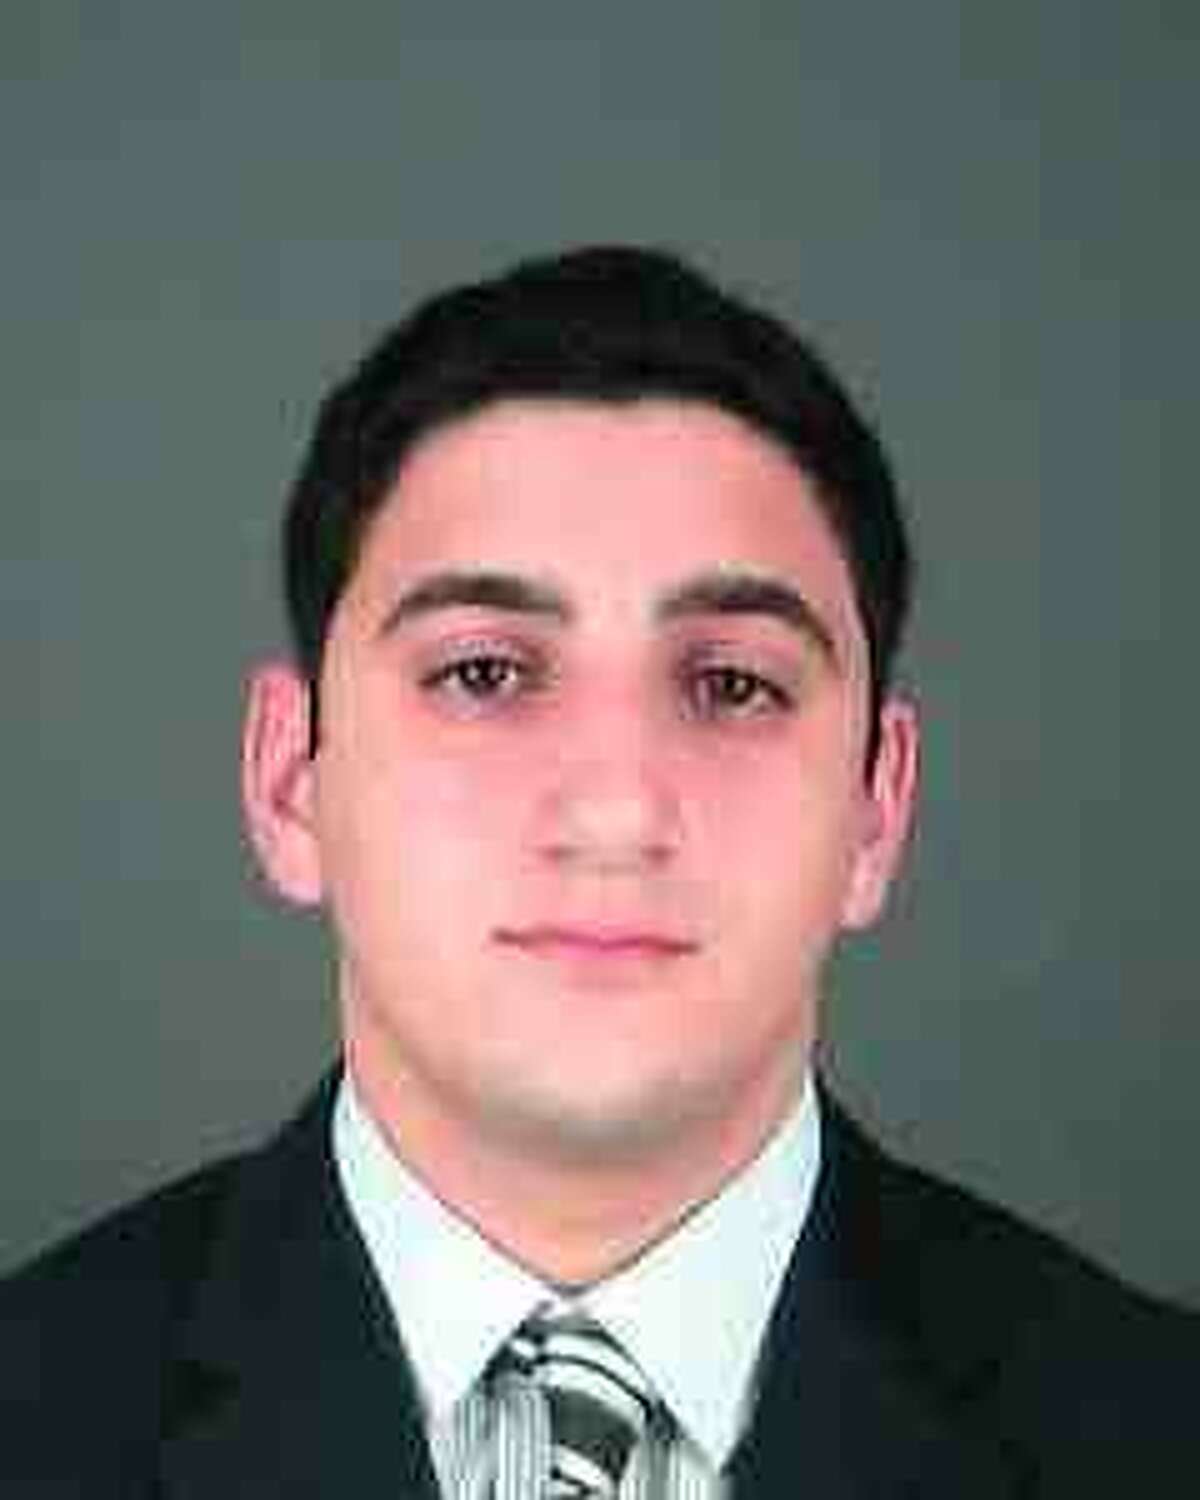 Joseph Angilletta is charged with first-degree hazing, Oct. 30, 2015. (Albany police photo)